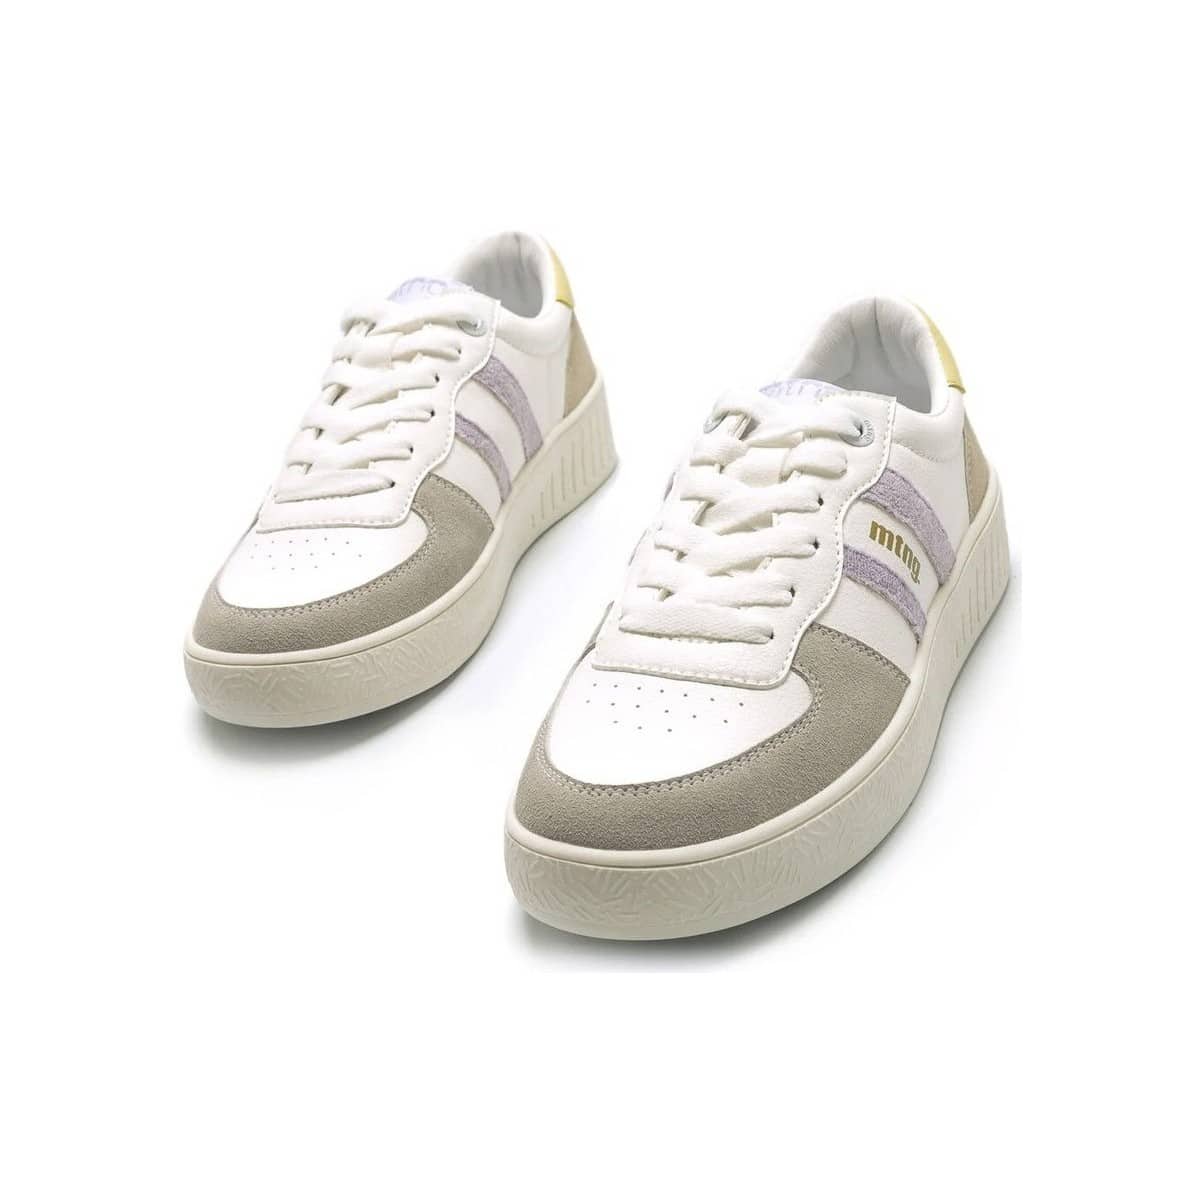 FLAT SNEAKERS 60283/1 WITH GRAY AND LILAC STRIPES MTNG WHITE